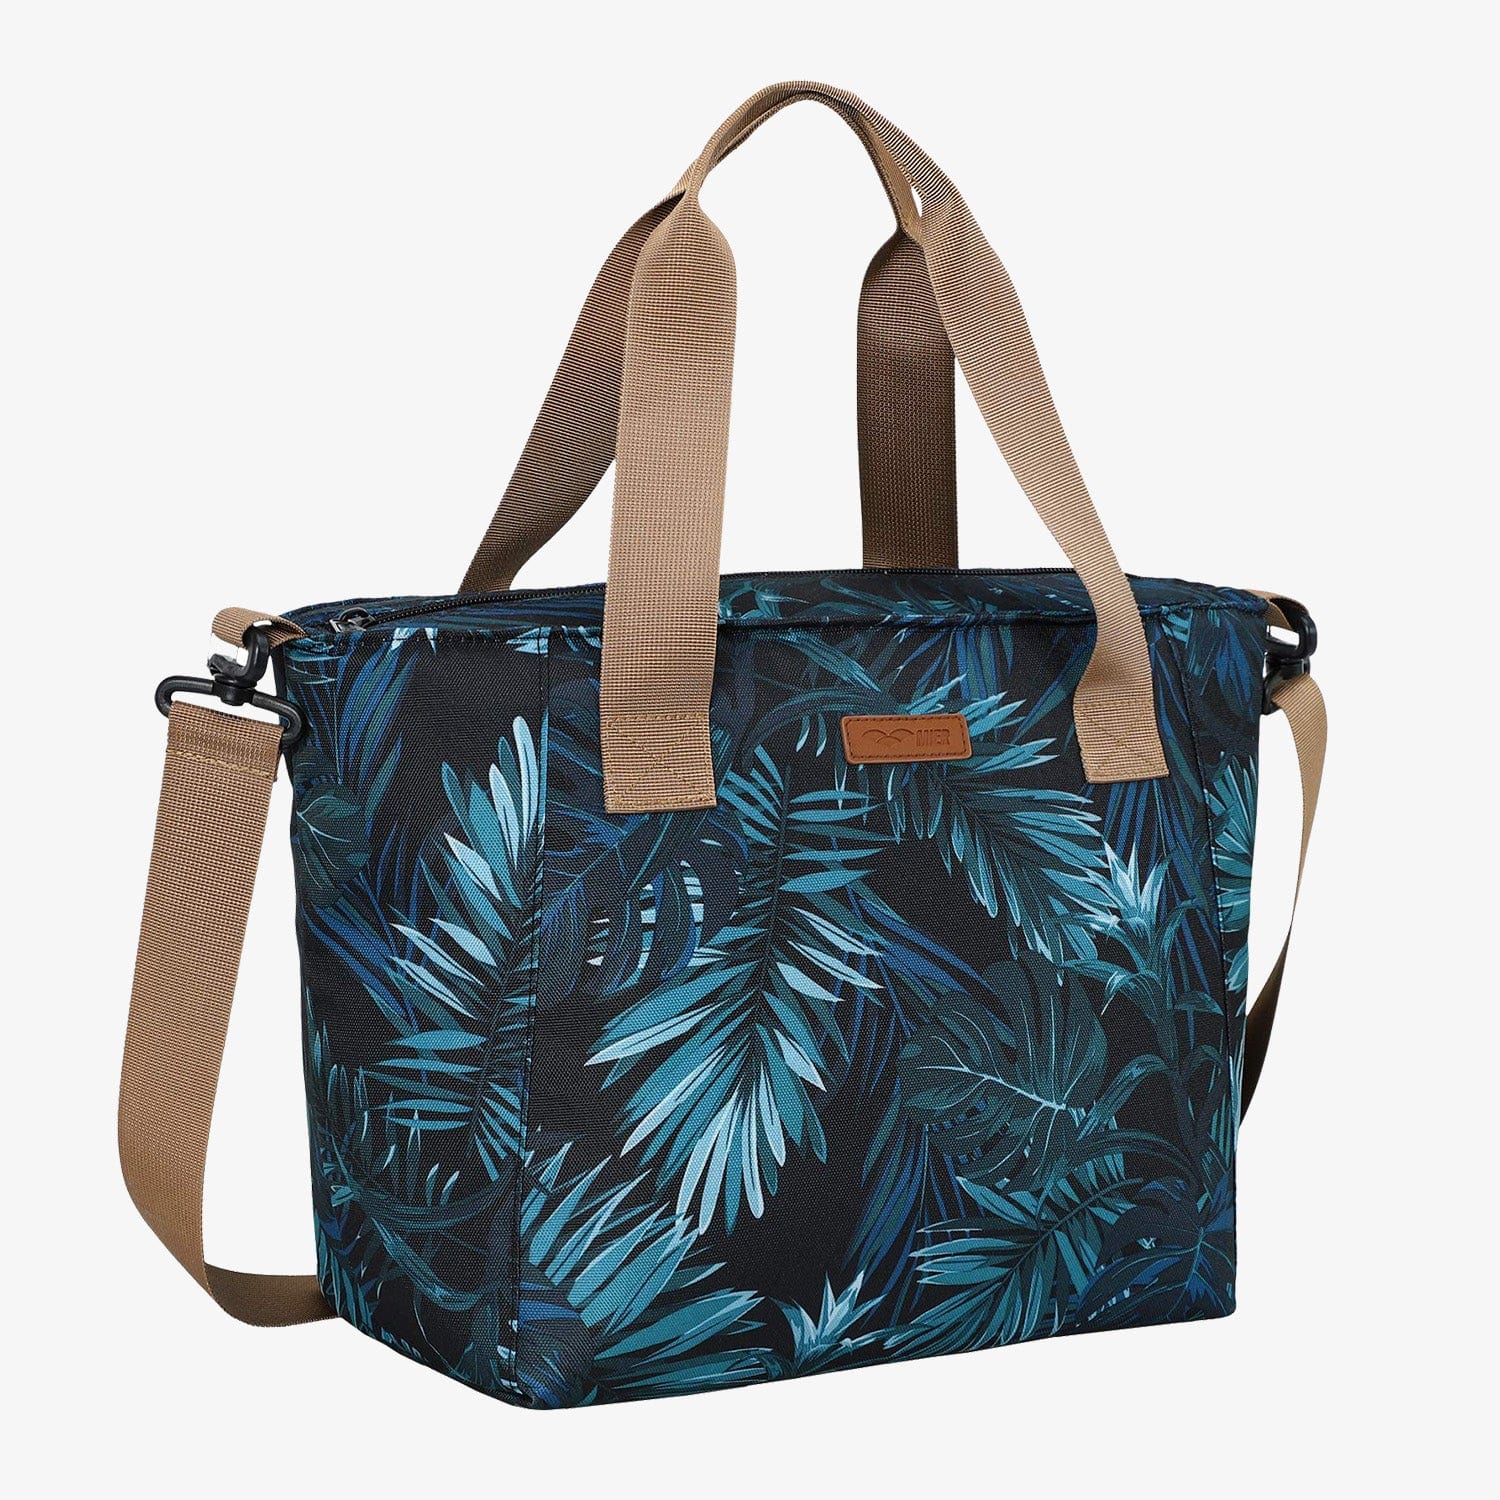 Large Lightweight Insulated Lunch Bag Travel Bag for Women Fashionable Lunch Bag Palm Leaves MIER